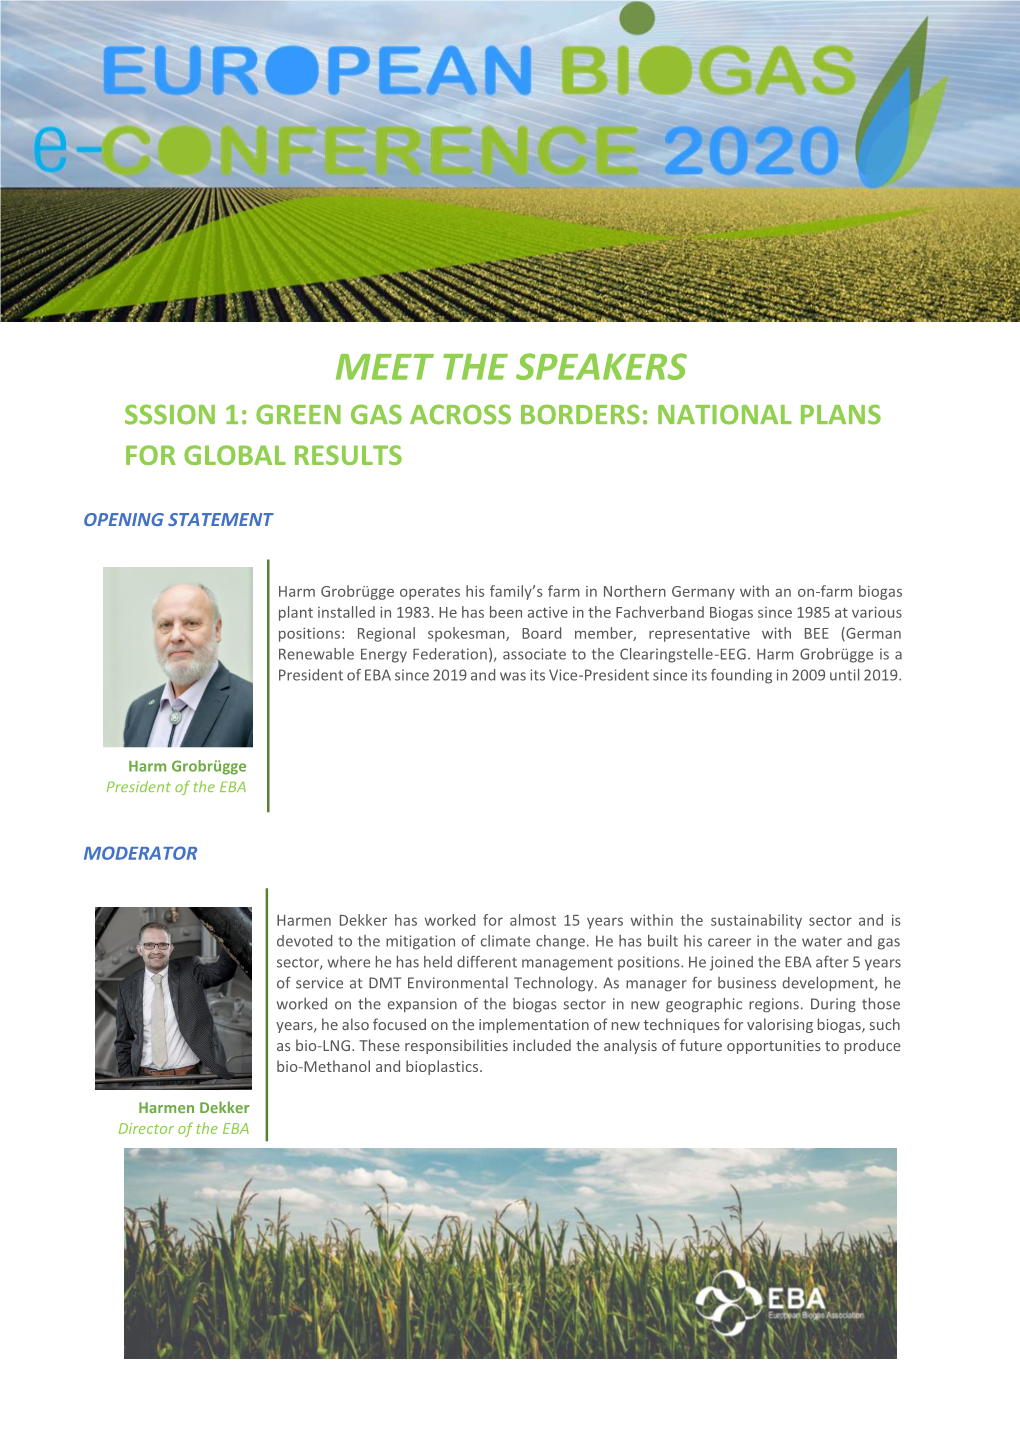 Meet the Speakers Sssion 1: Green Gas Across Borders: National Plans for Global Results